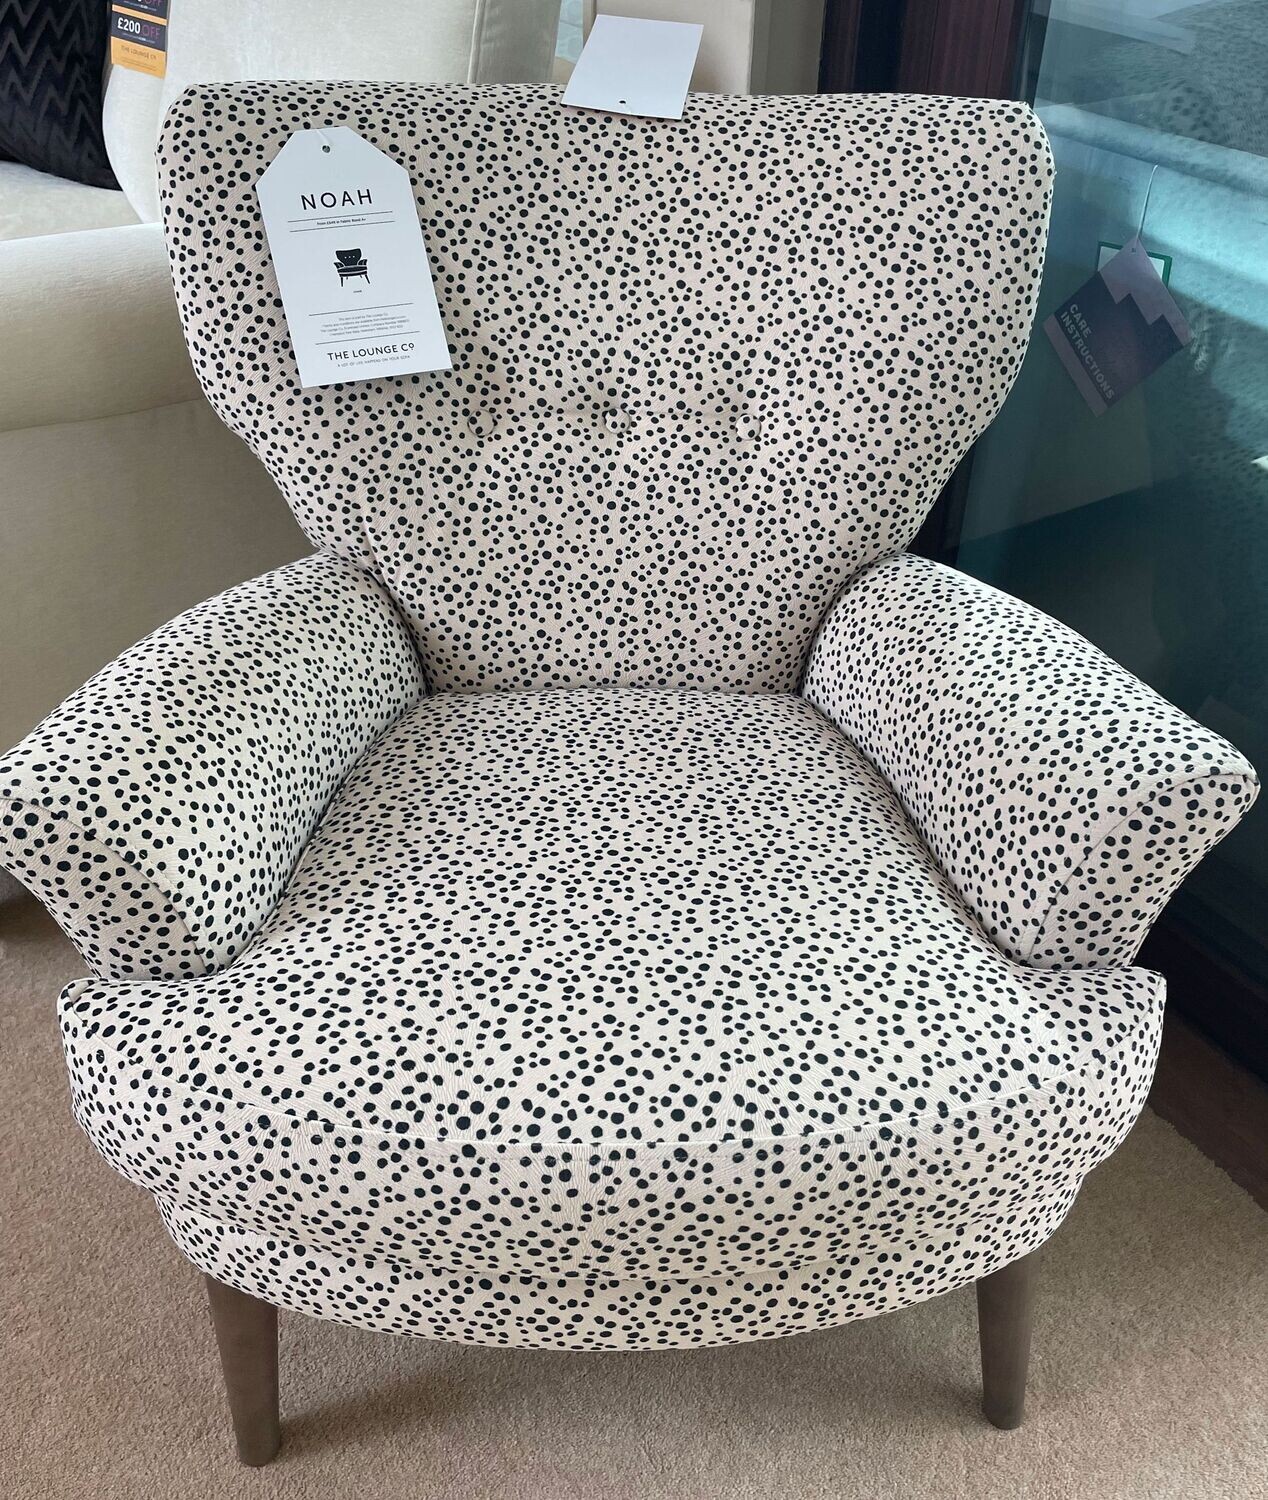 CLEARANCE Lounge Co Noah Chair RRP £899 - NOW HALF PRICE £449